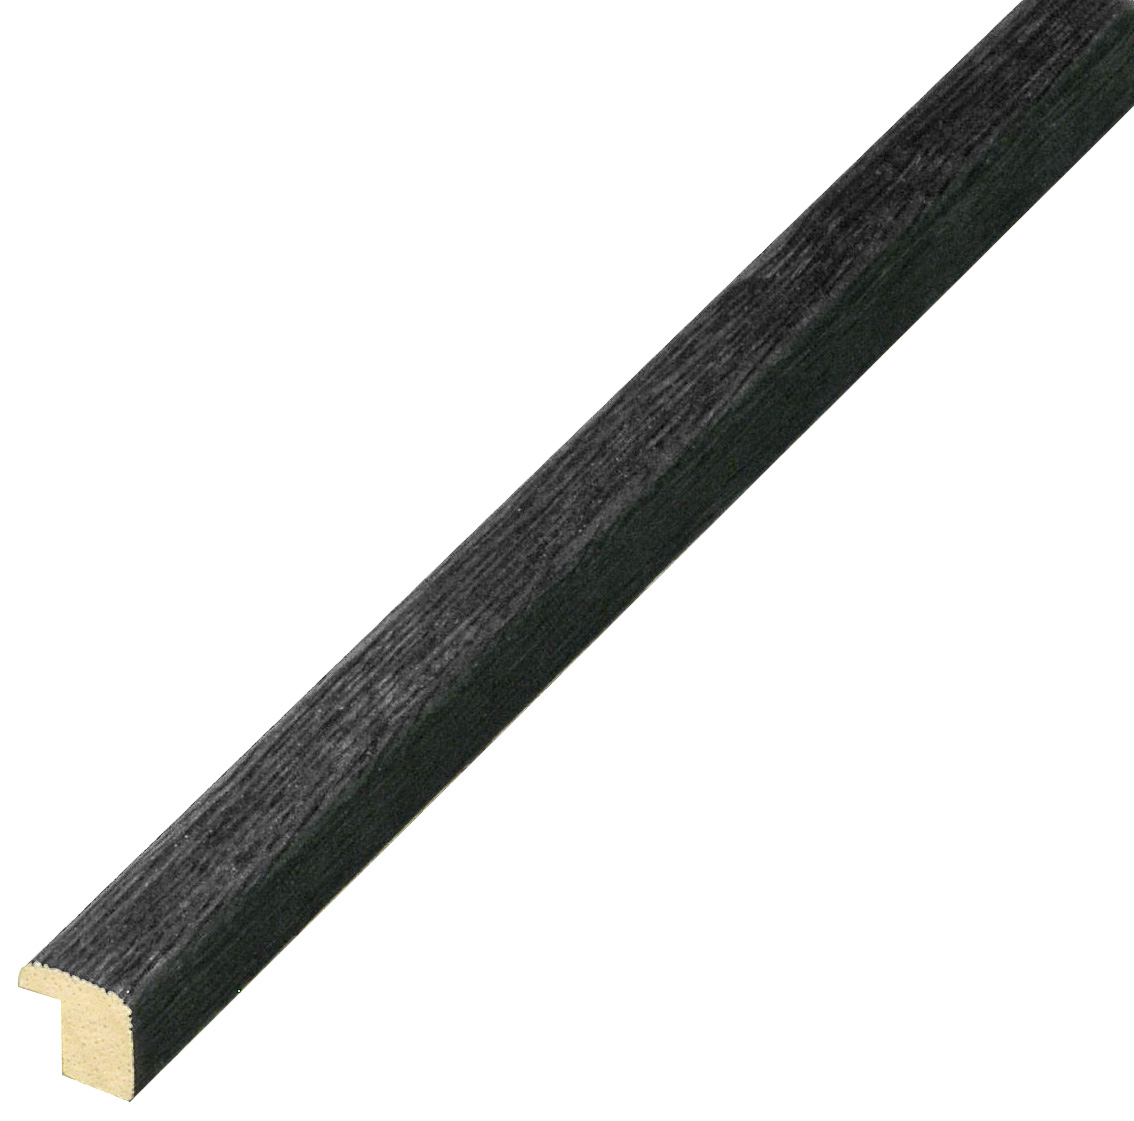 Moulding ayous woodworm treated mm 13x13 - scratched finish - Black - 311NERO